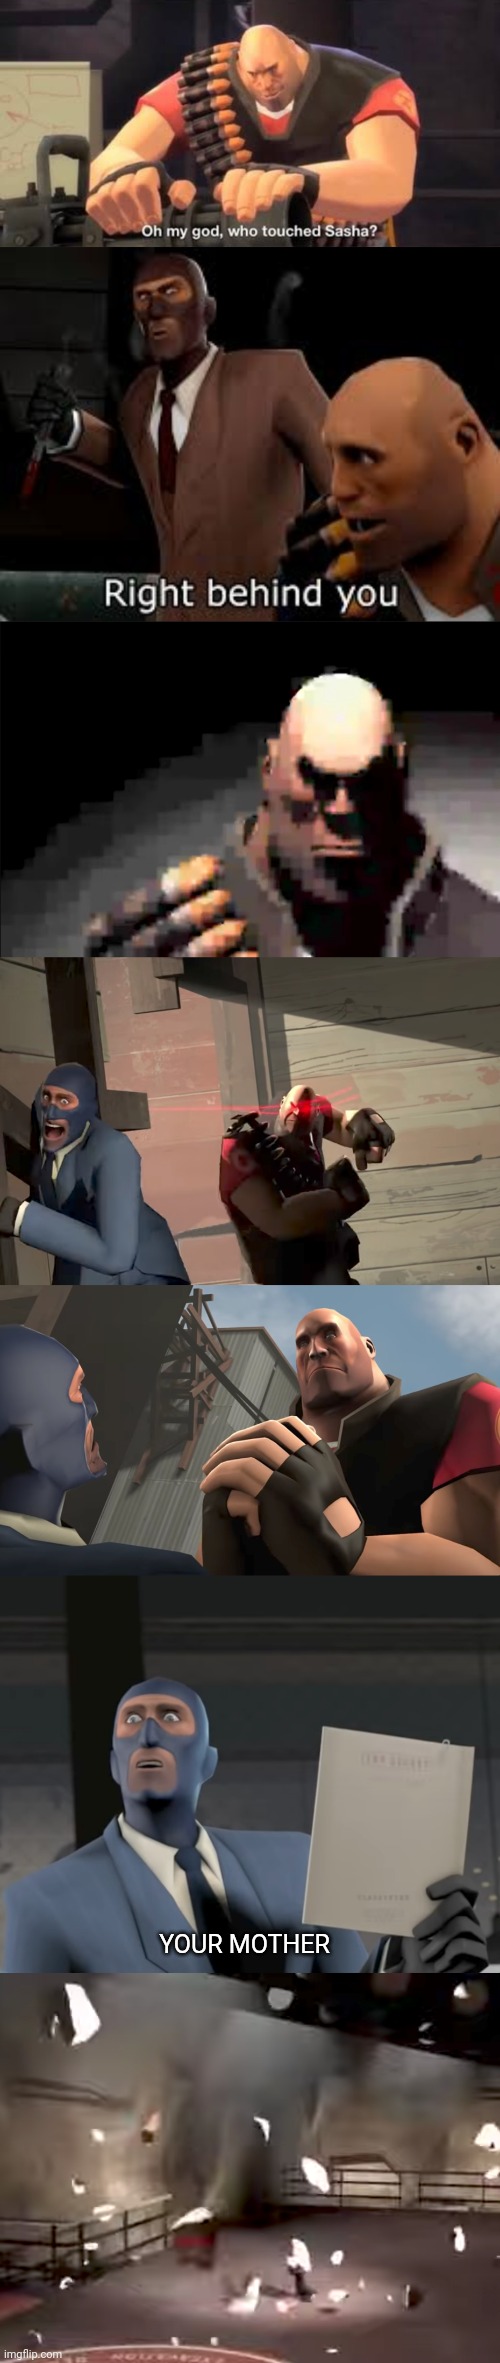 YOUR MOTHER | image tagged in who touched sasha,heavy staring,tf2,team fortress 2,memes,shitpost | made w/ Imgflip meme maker